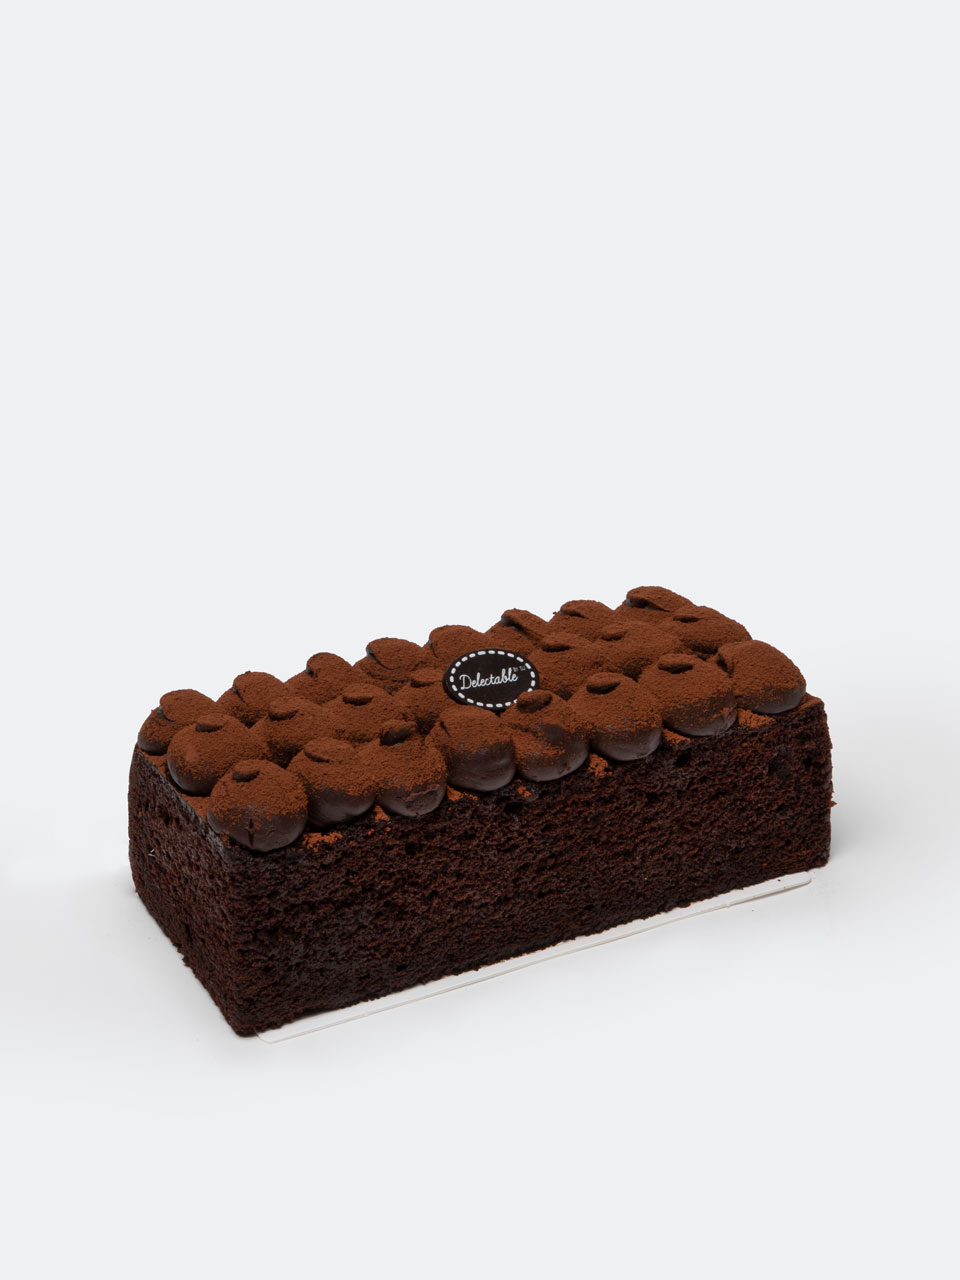 Delectable Chocolate Cake - online cake delivery Kuala Lumpur